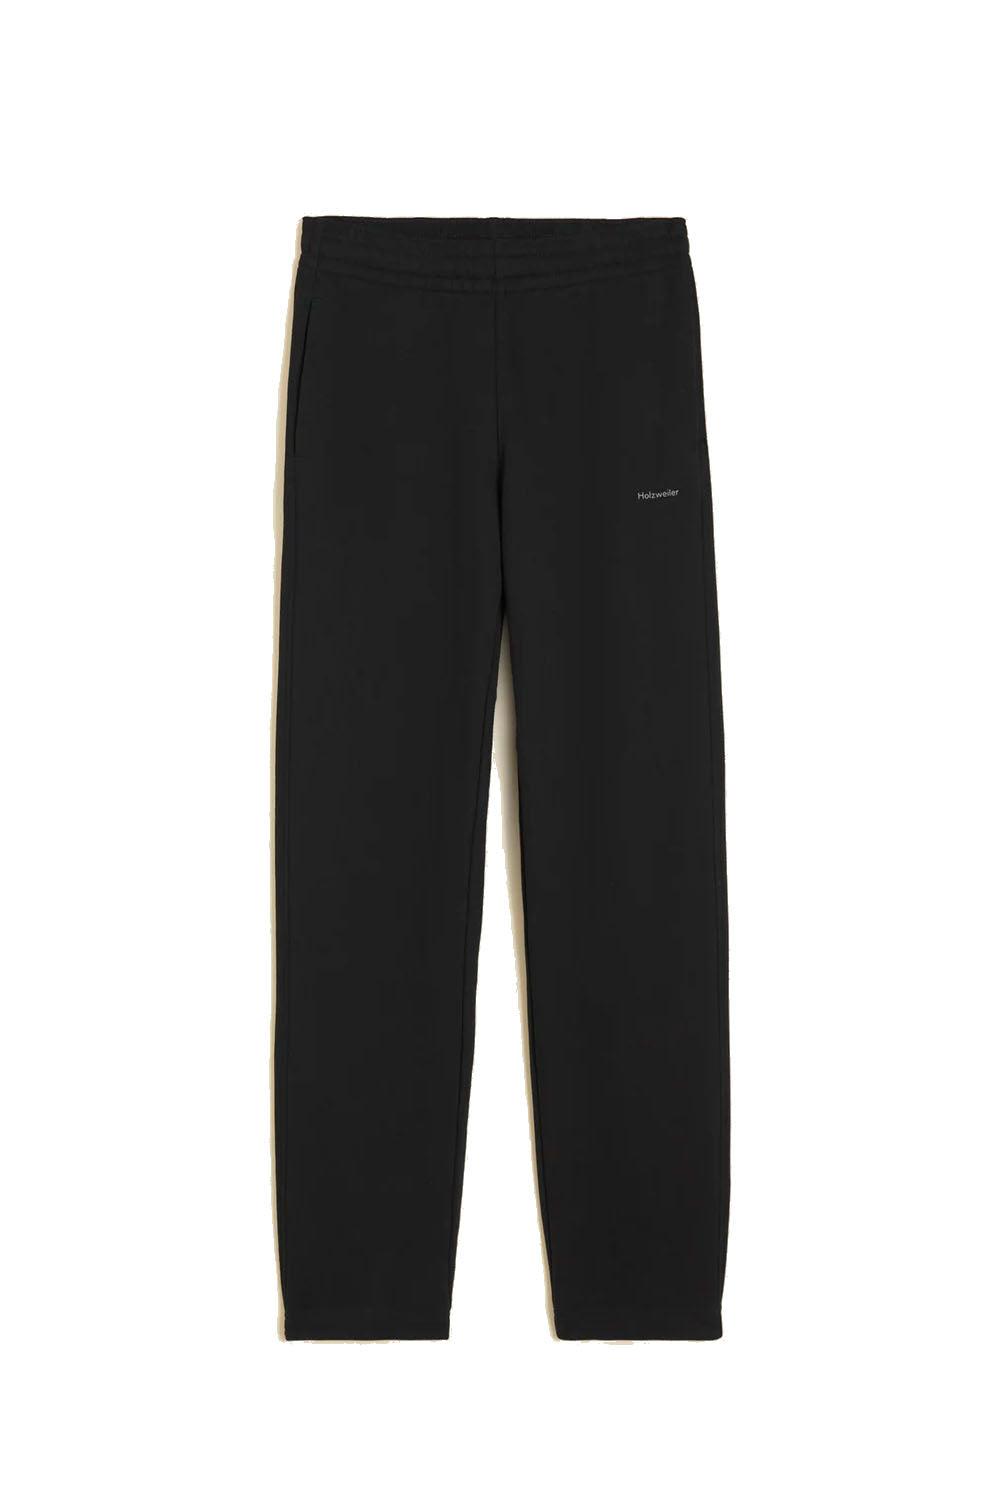 W. Relaxed Sweatpants Black